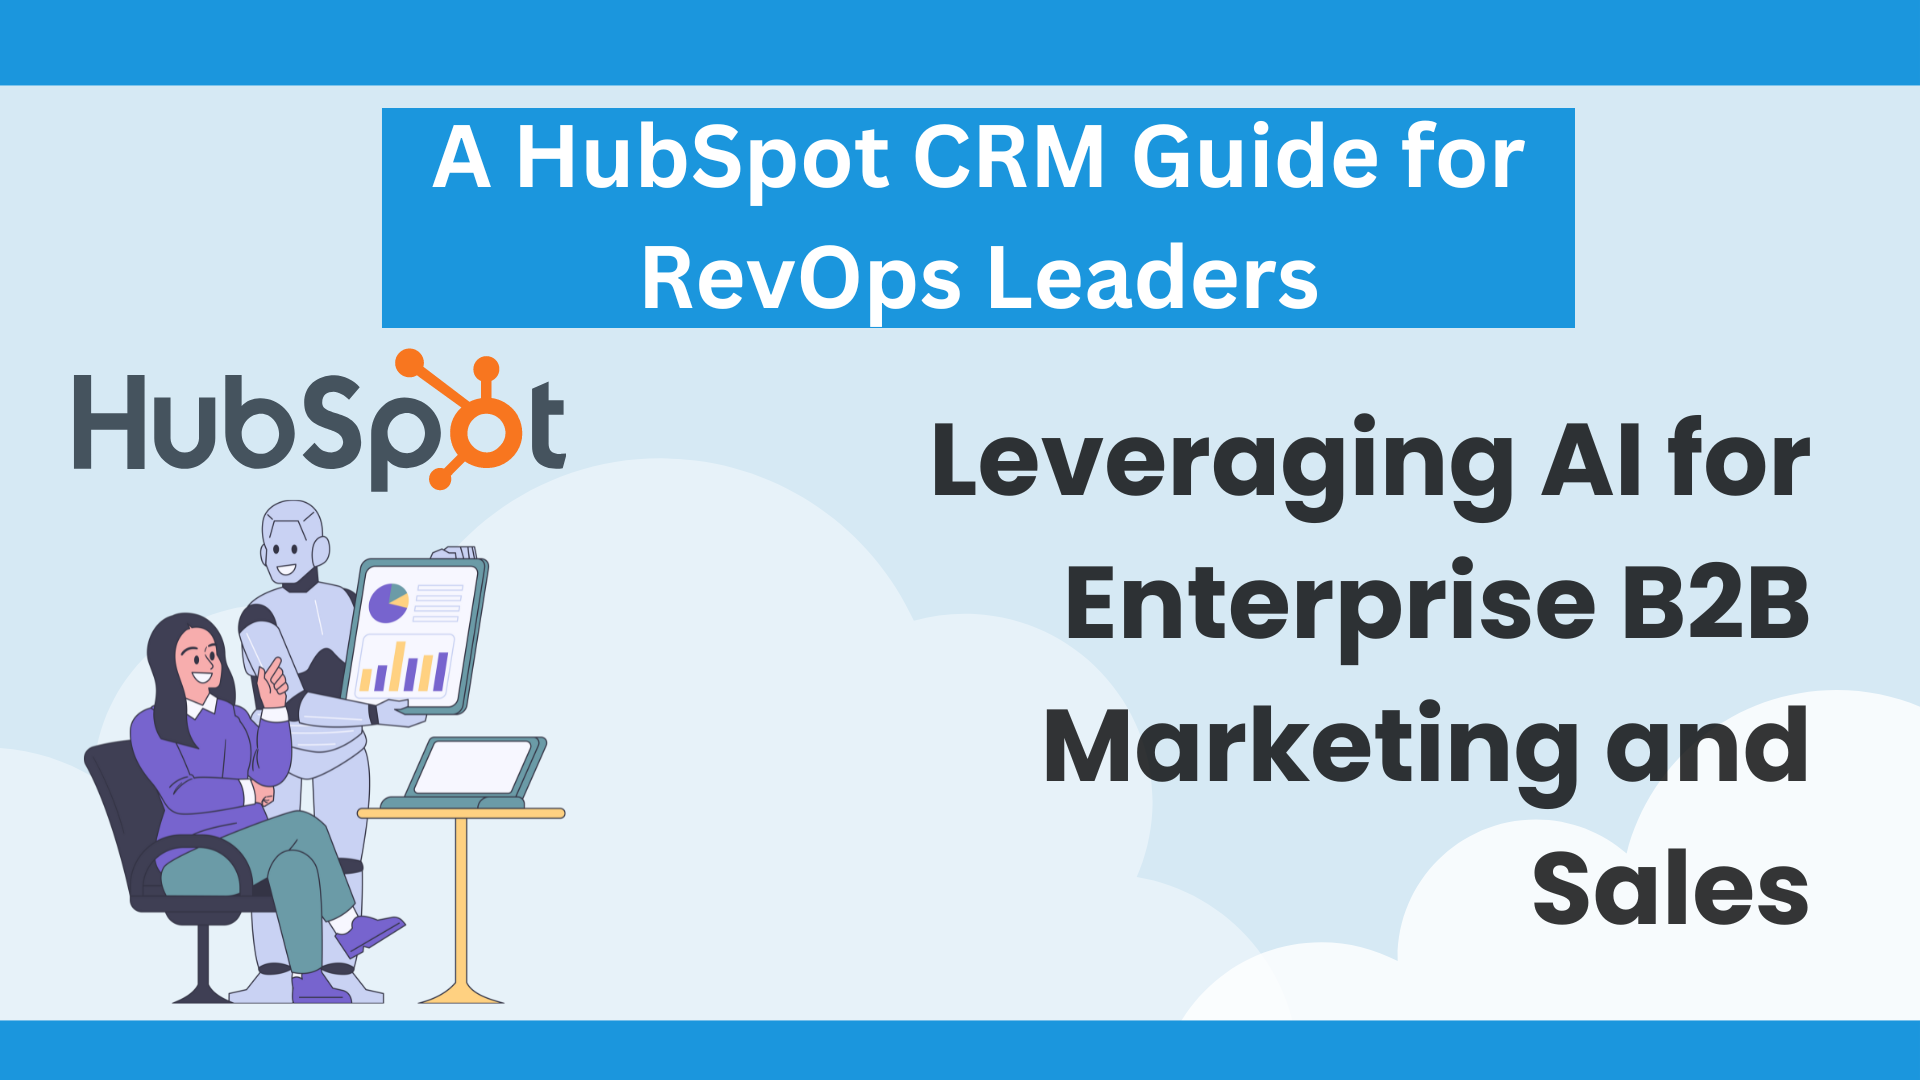 Leveraging AI for Enterprise B2B Marketing and Sales: A HubSpot CRM Guide for RevOps Leaders